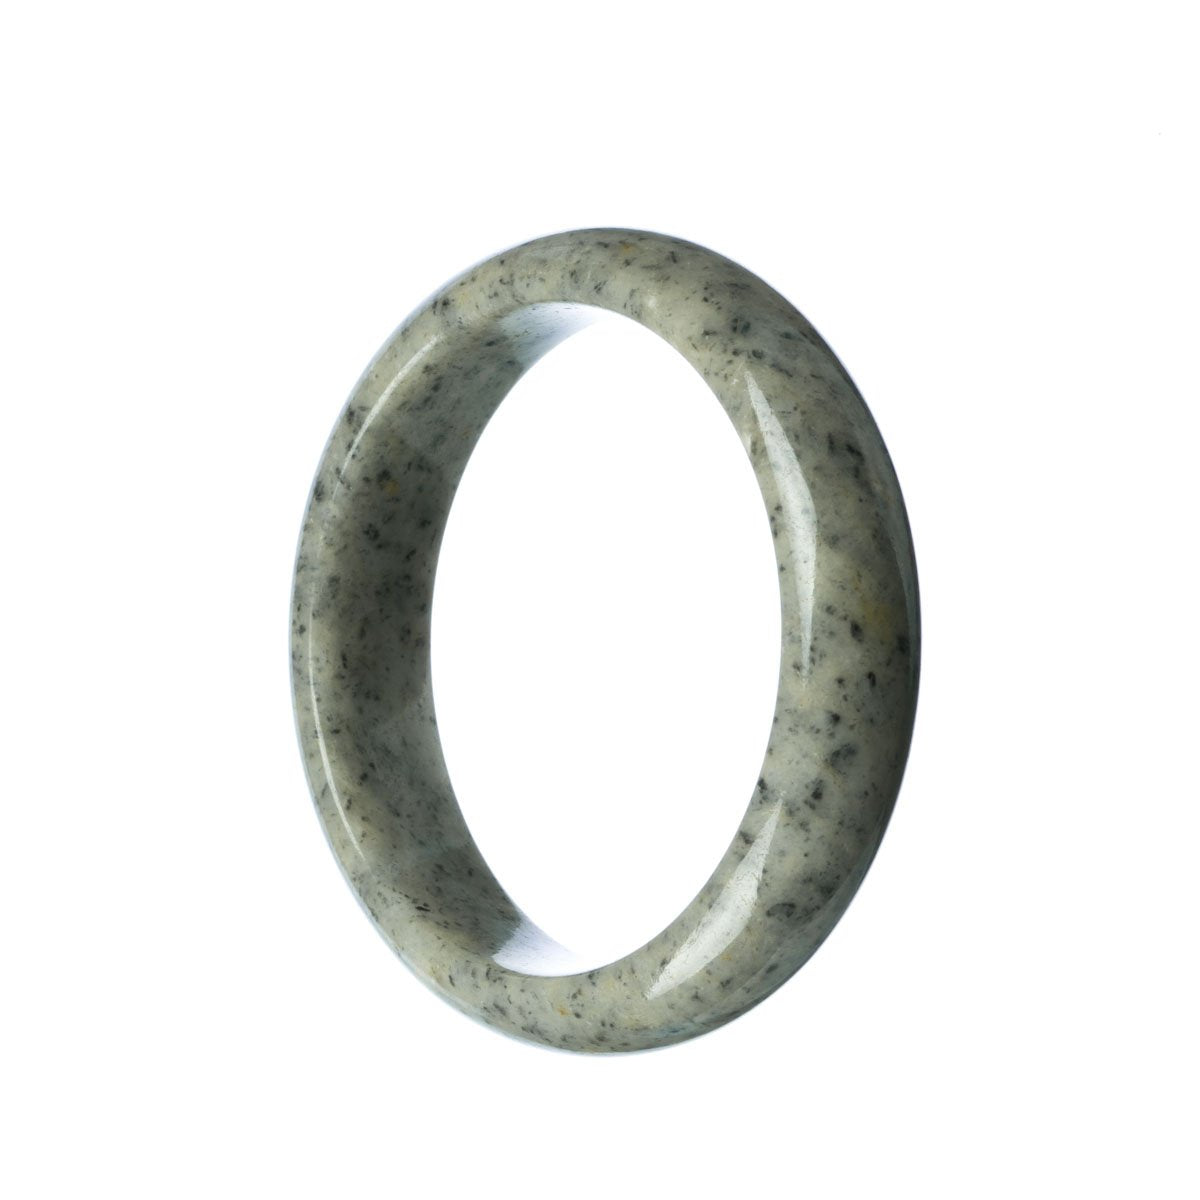 A beautiful grey Burmese jade bangle bracelet with a 59mm half moon shape, made with authentic Grade A jade. Sold by MAYS GEMS.